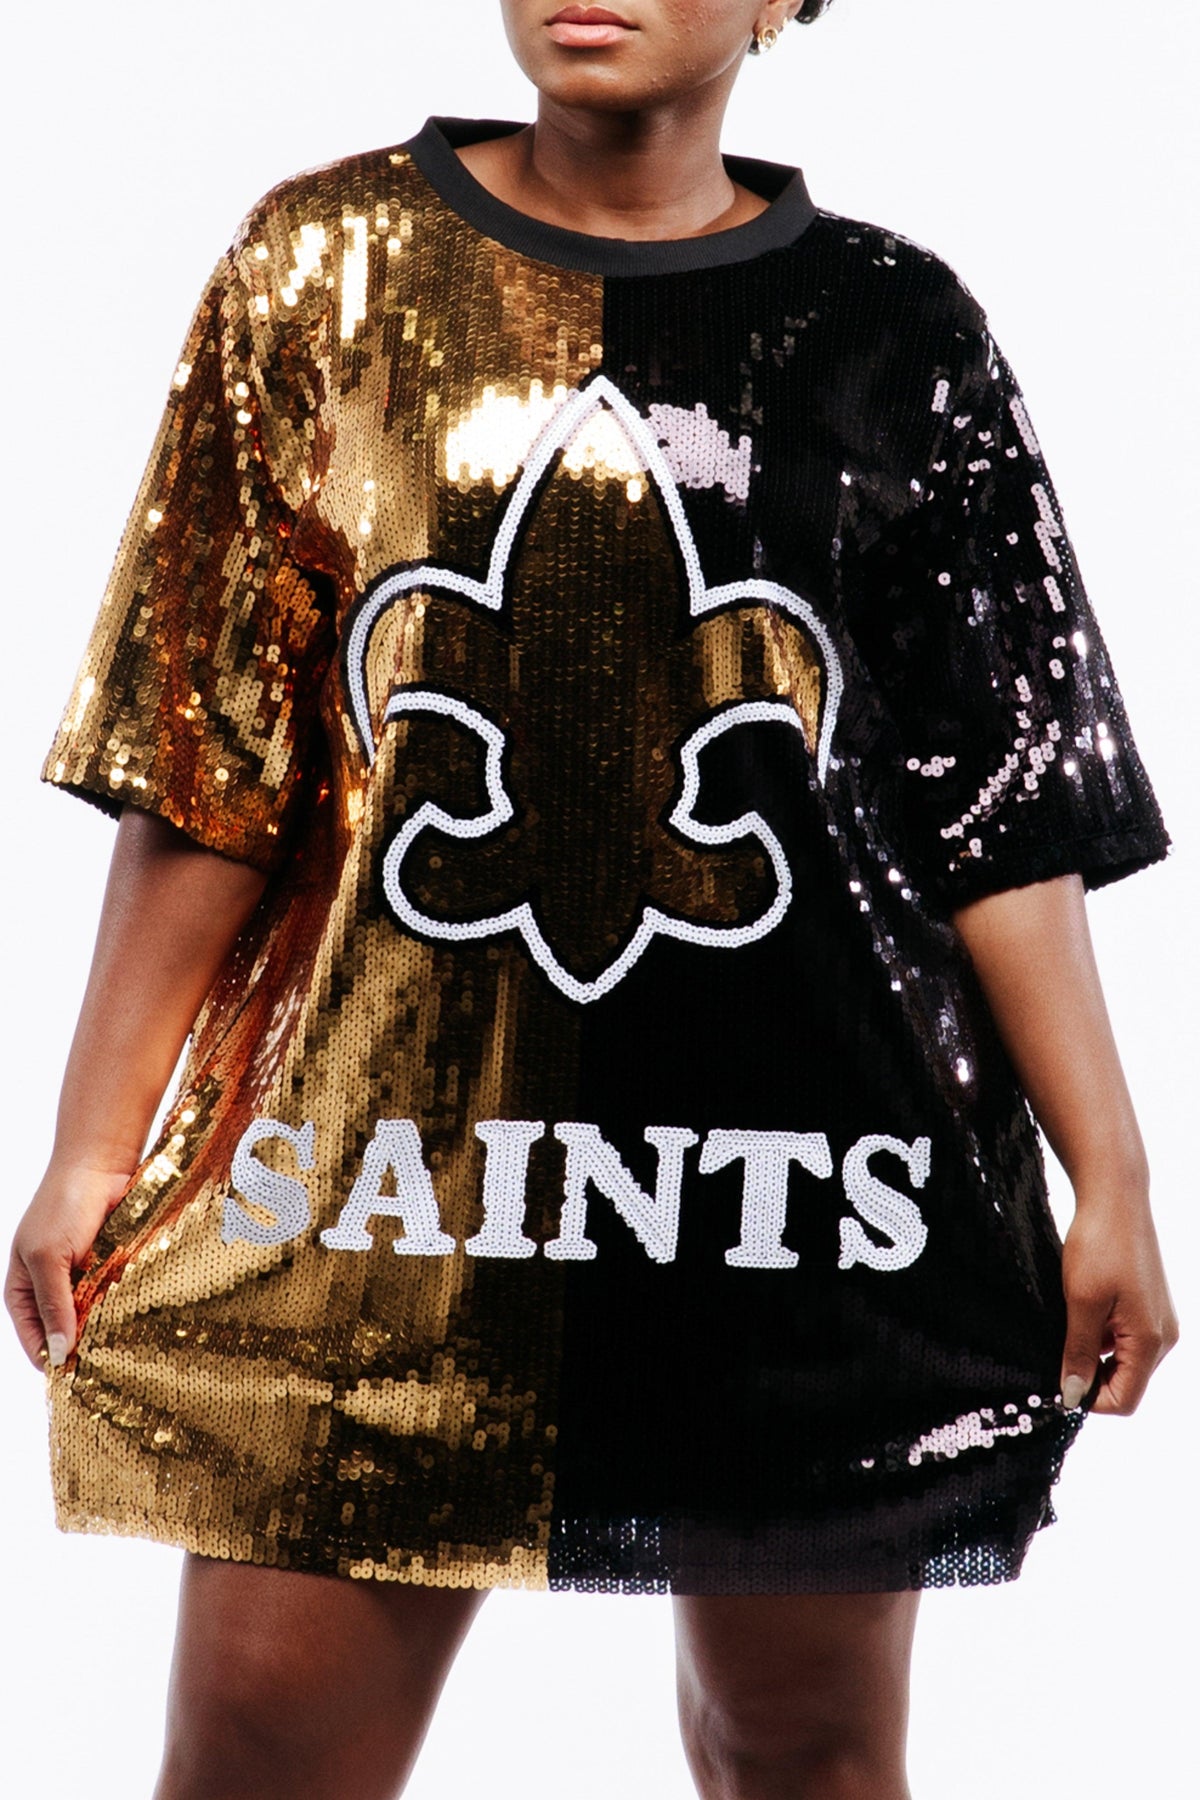 The New Orleans Football Sequin Jersey Dress up close.